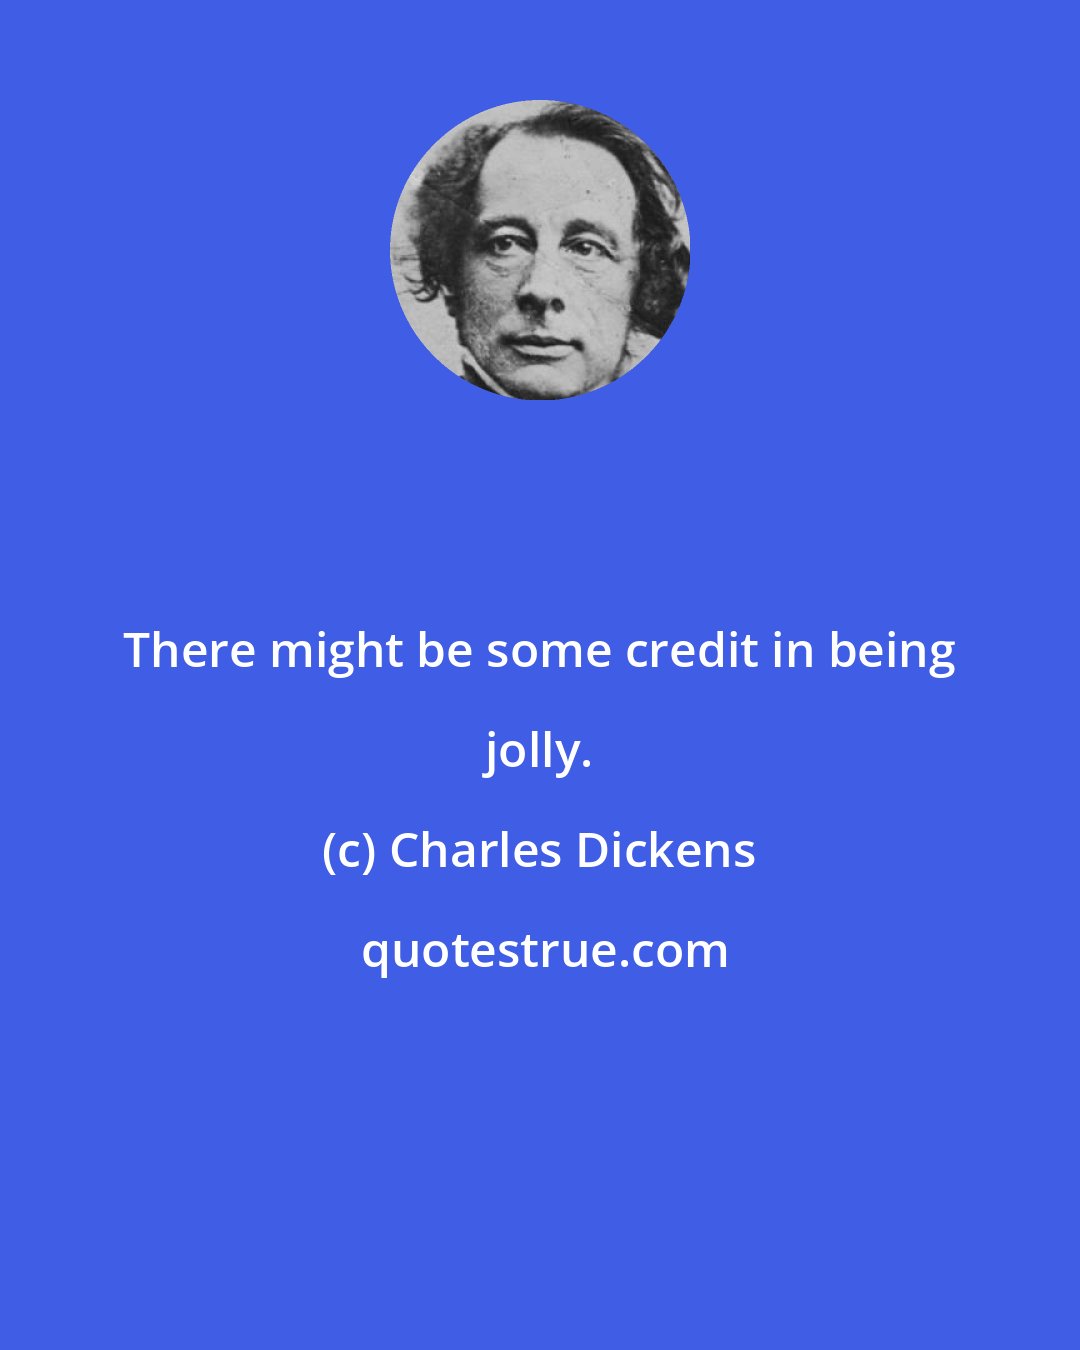 Charles Dickens: There might be some credit in being jolly.